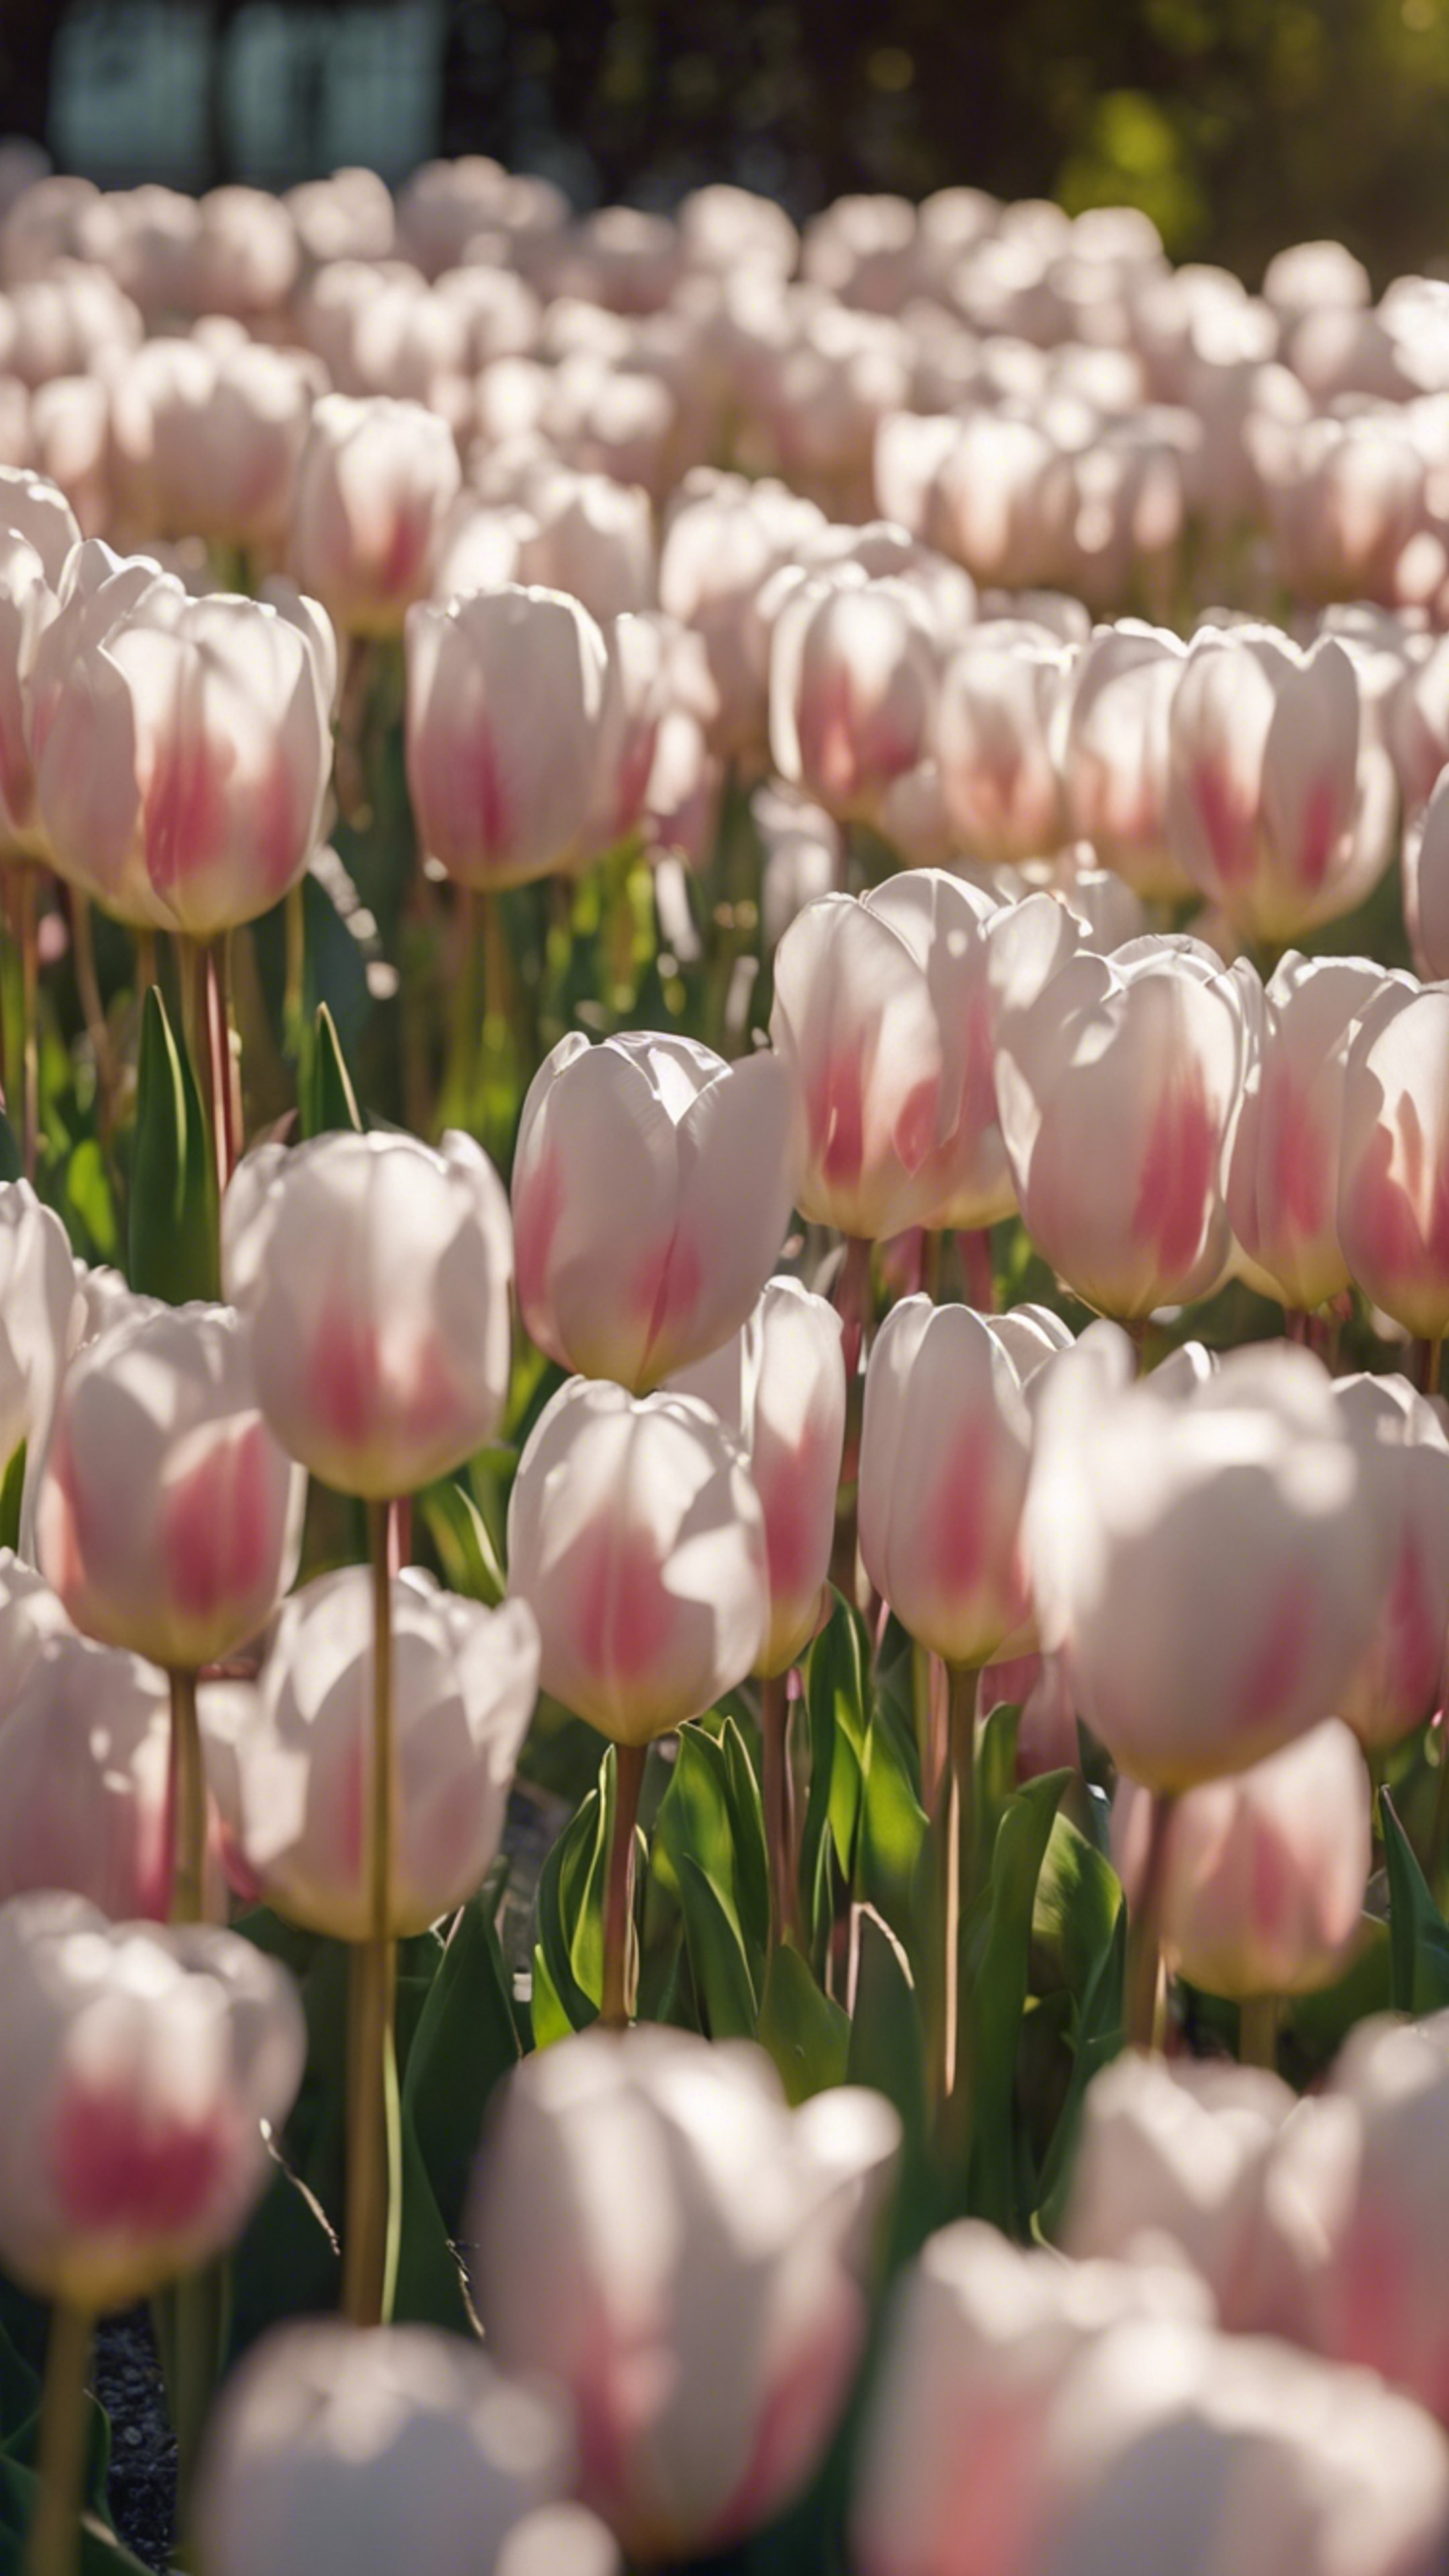 A garden filled with white and pink tulips, shimmering under the soft glow of a morning sun. Hintergrund[0043435f230e41f4a509]